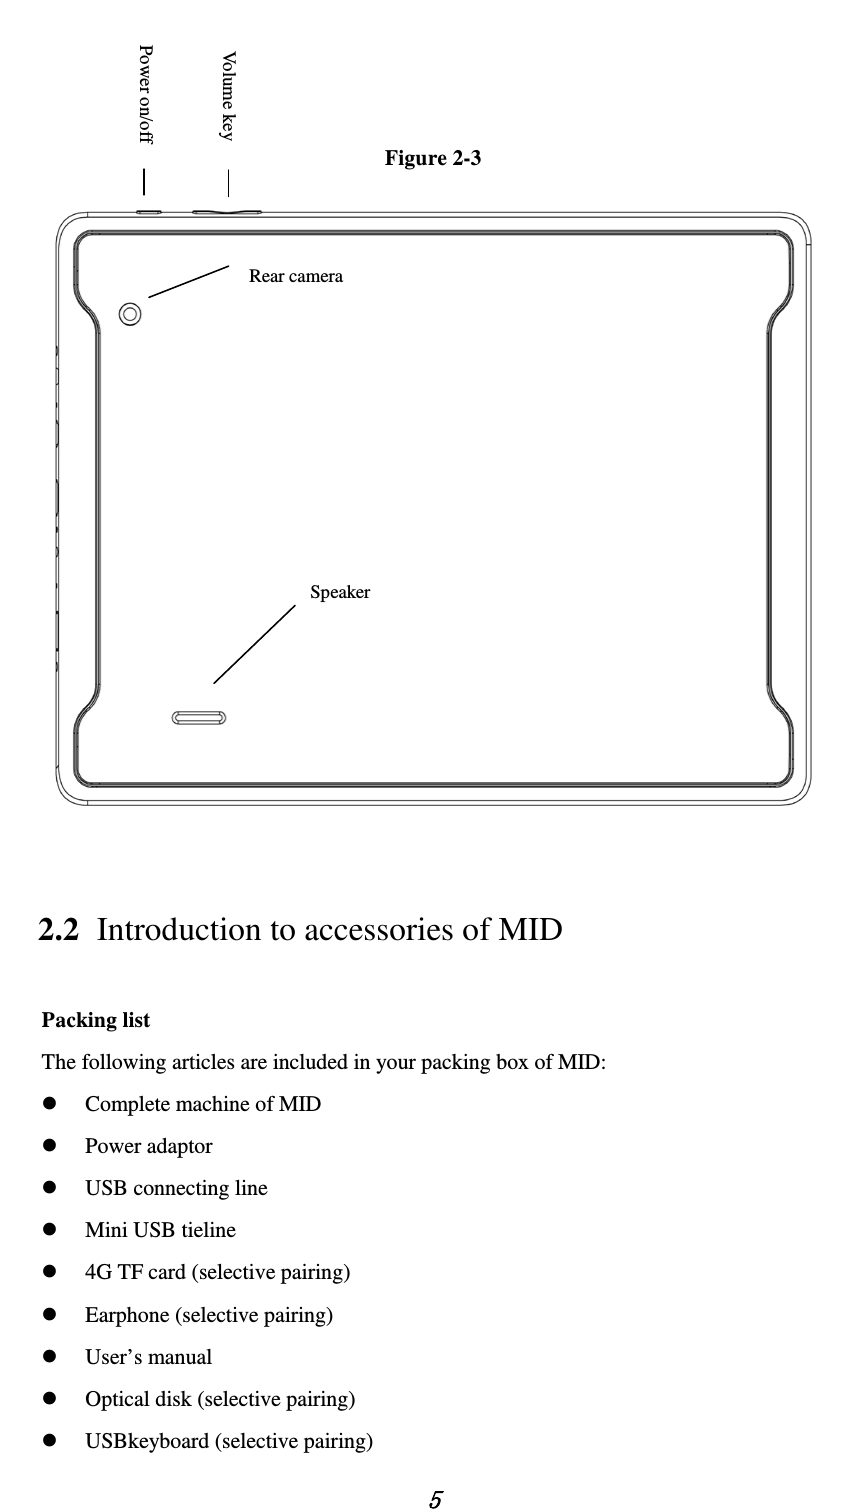    5    Figure 2-3  2.2 Introduction to accessories of MID Packing list The following articles are included in your packing box of MID:  Complete machine of MID  Power adaptor  USB connecting line  Mini USB tieline  4G TF card (selective pairing)  Earphone (selective pairing)  User’s manual  Optical disk (selective pairing)  USBkeyboard (selective pairing) Speaker Rear camera Volume key Power on/off  